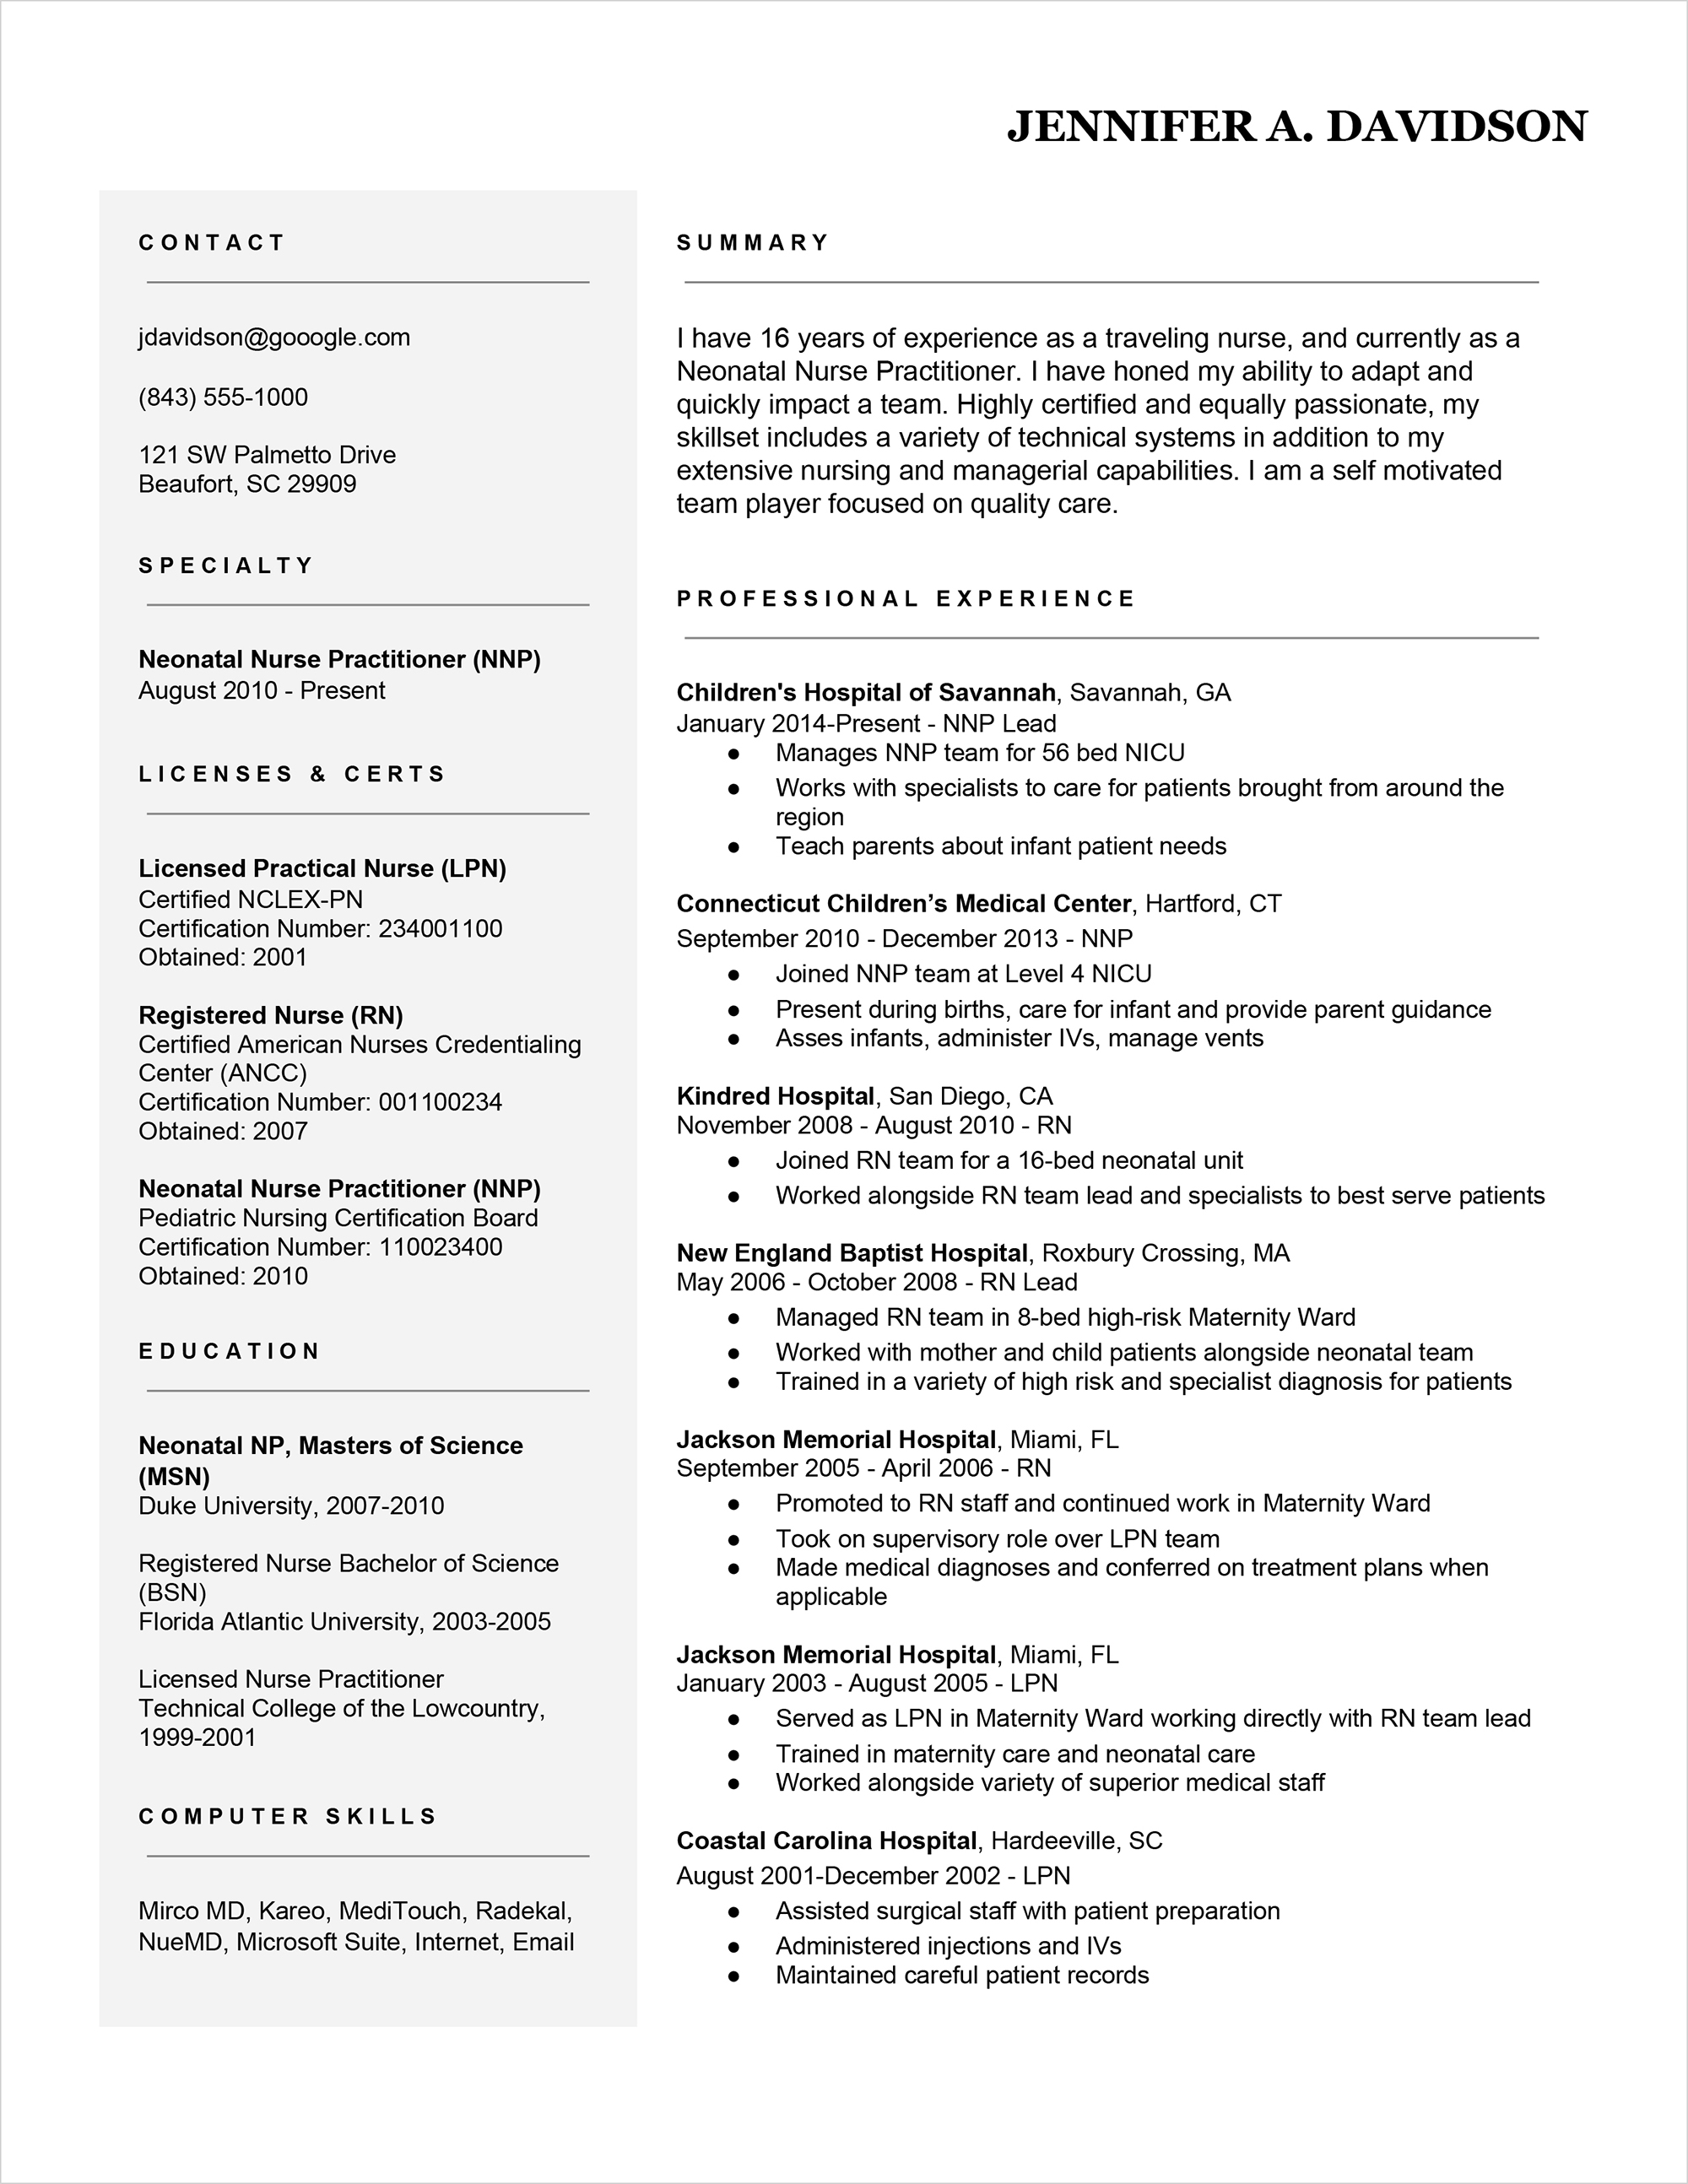 Travel Nurse Resume Template | Travel Nurse Resume Examples 4 Secrets for Standing Out